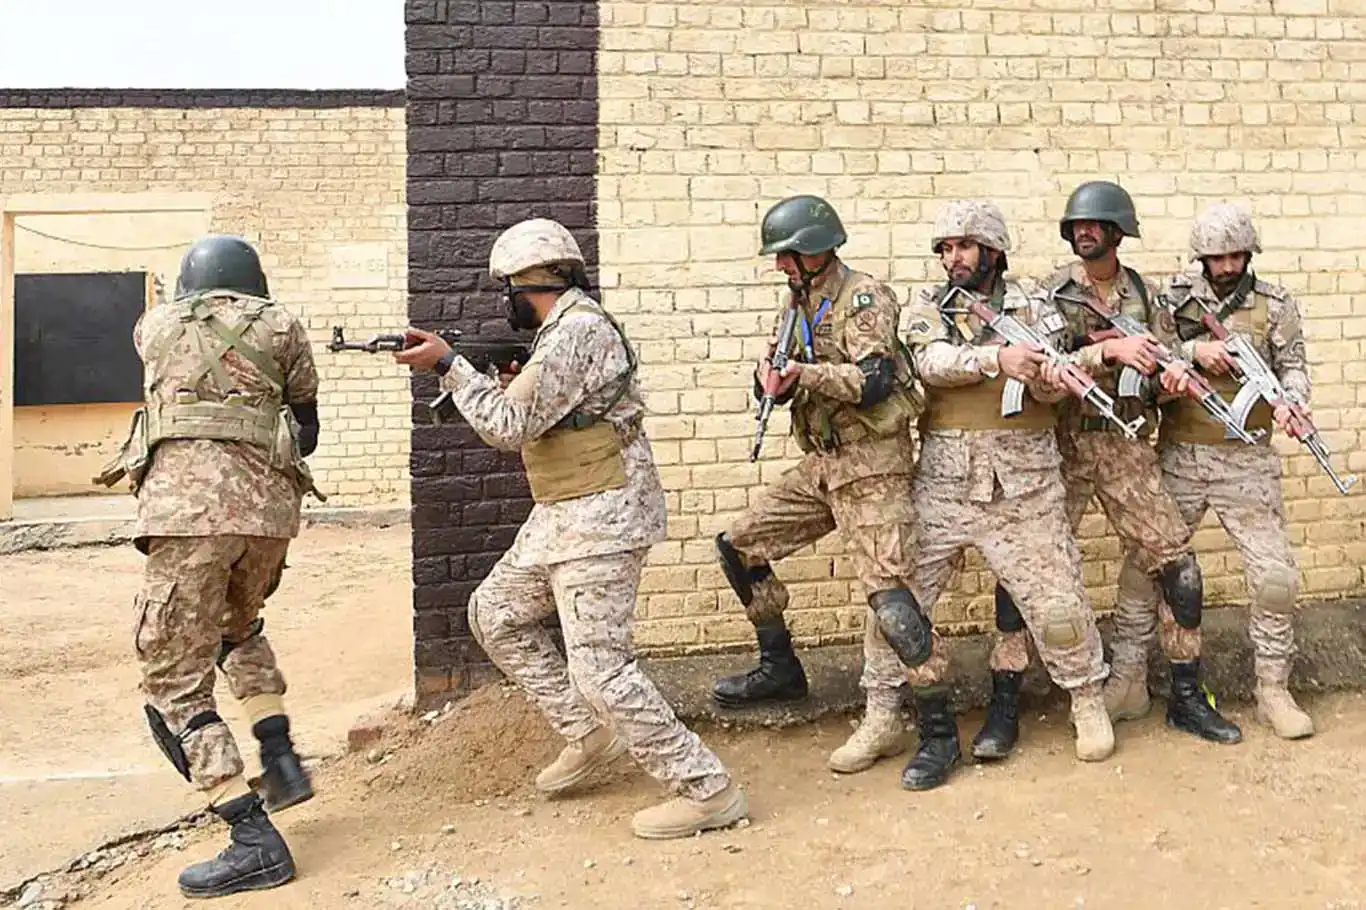 Pakistan, Saudi Arabia launch joint special forces exercise